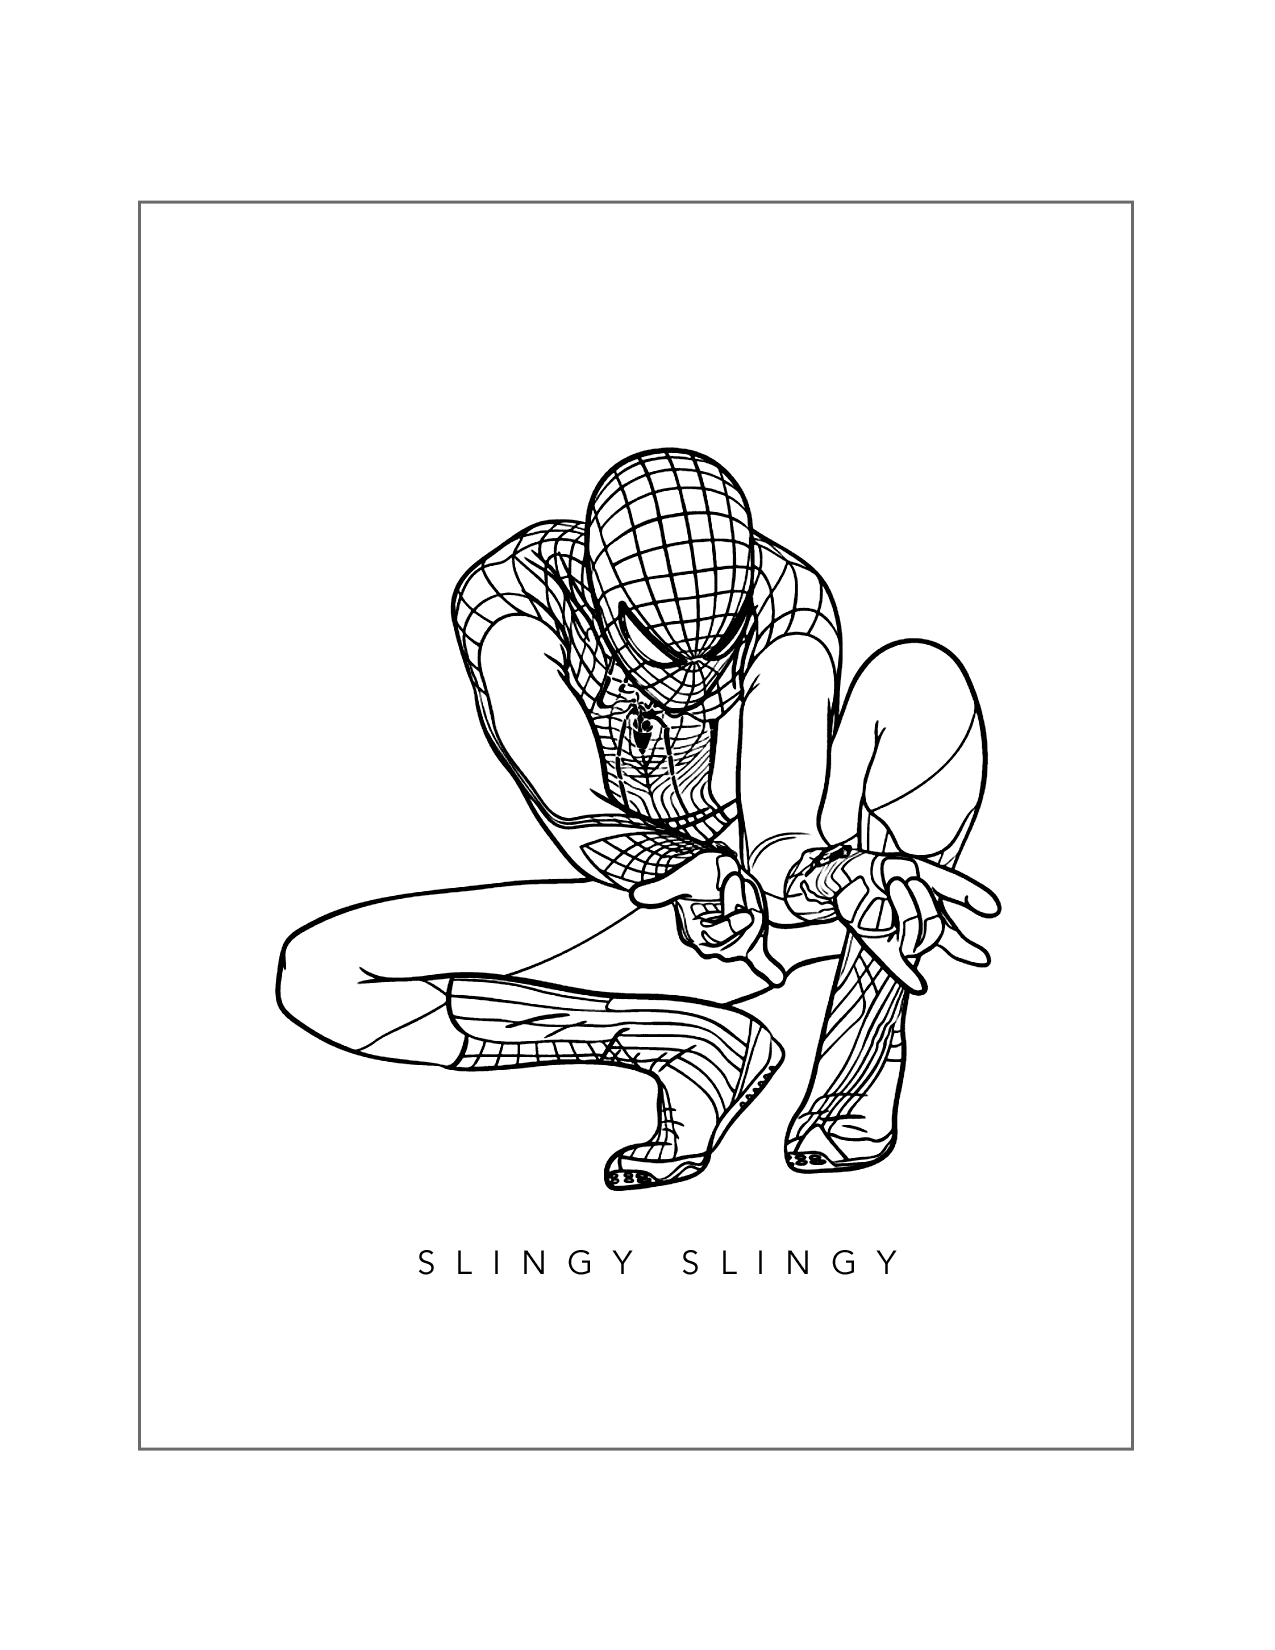 Slingy Slingy Spiderman Coloring Page